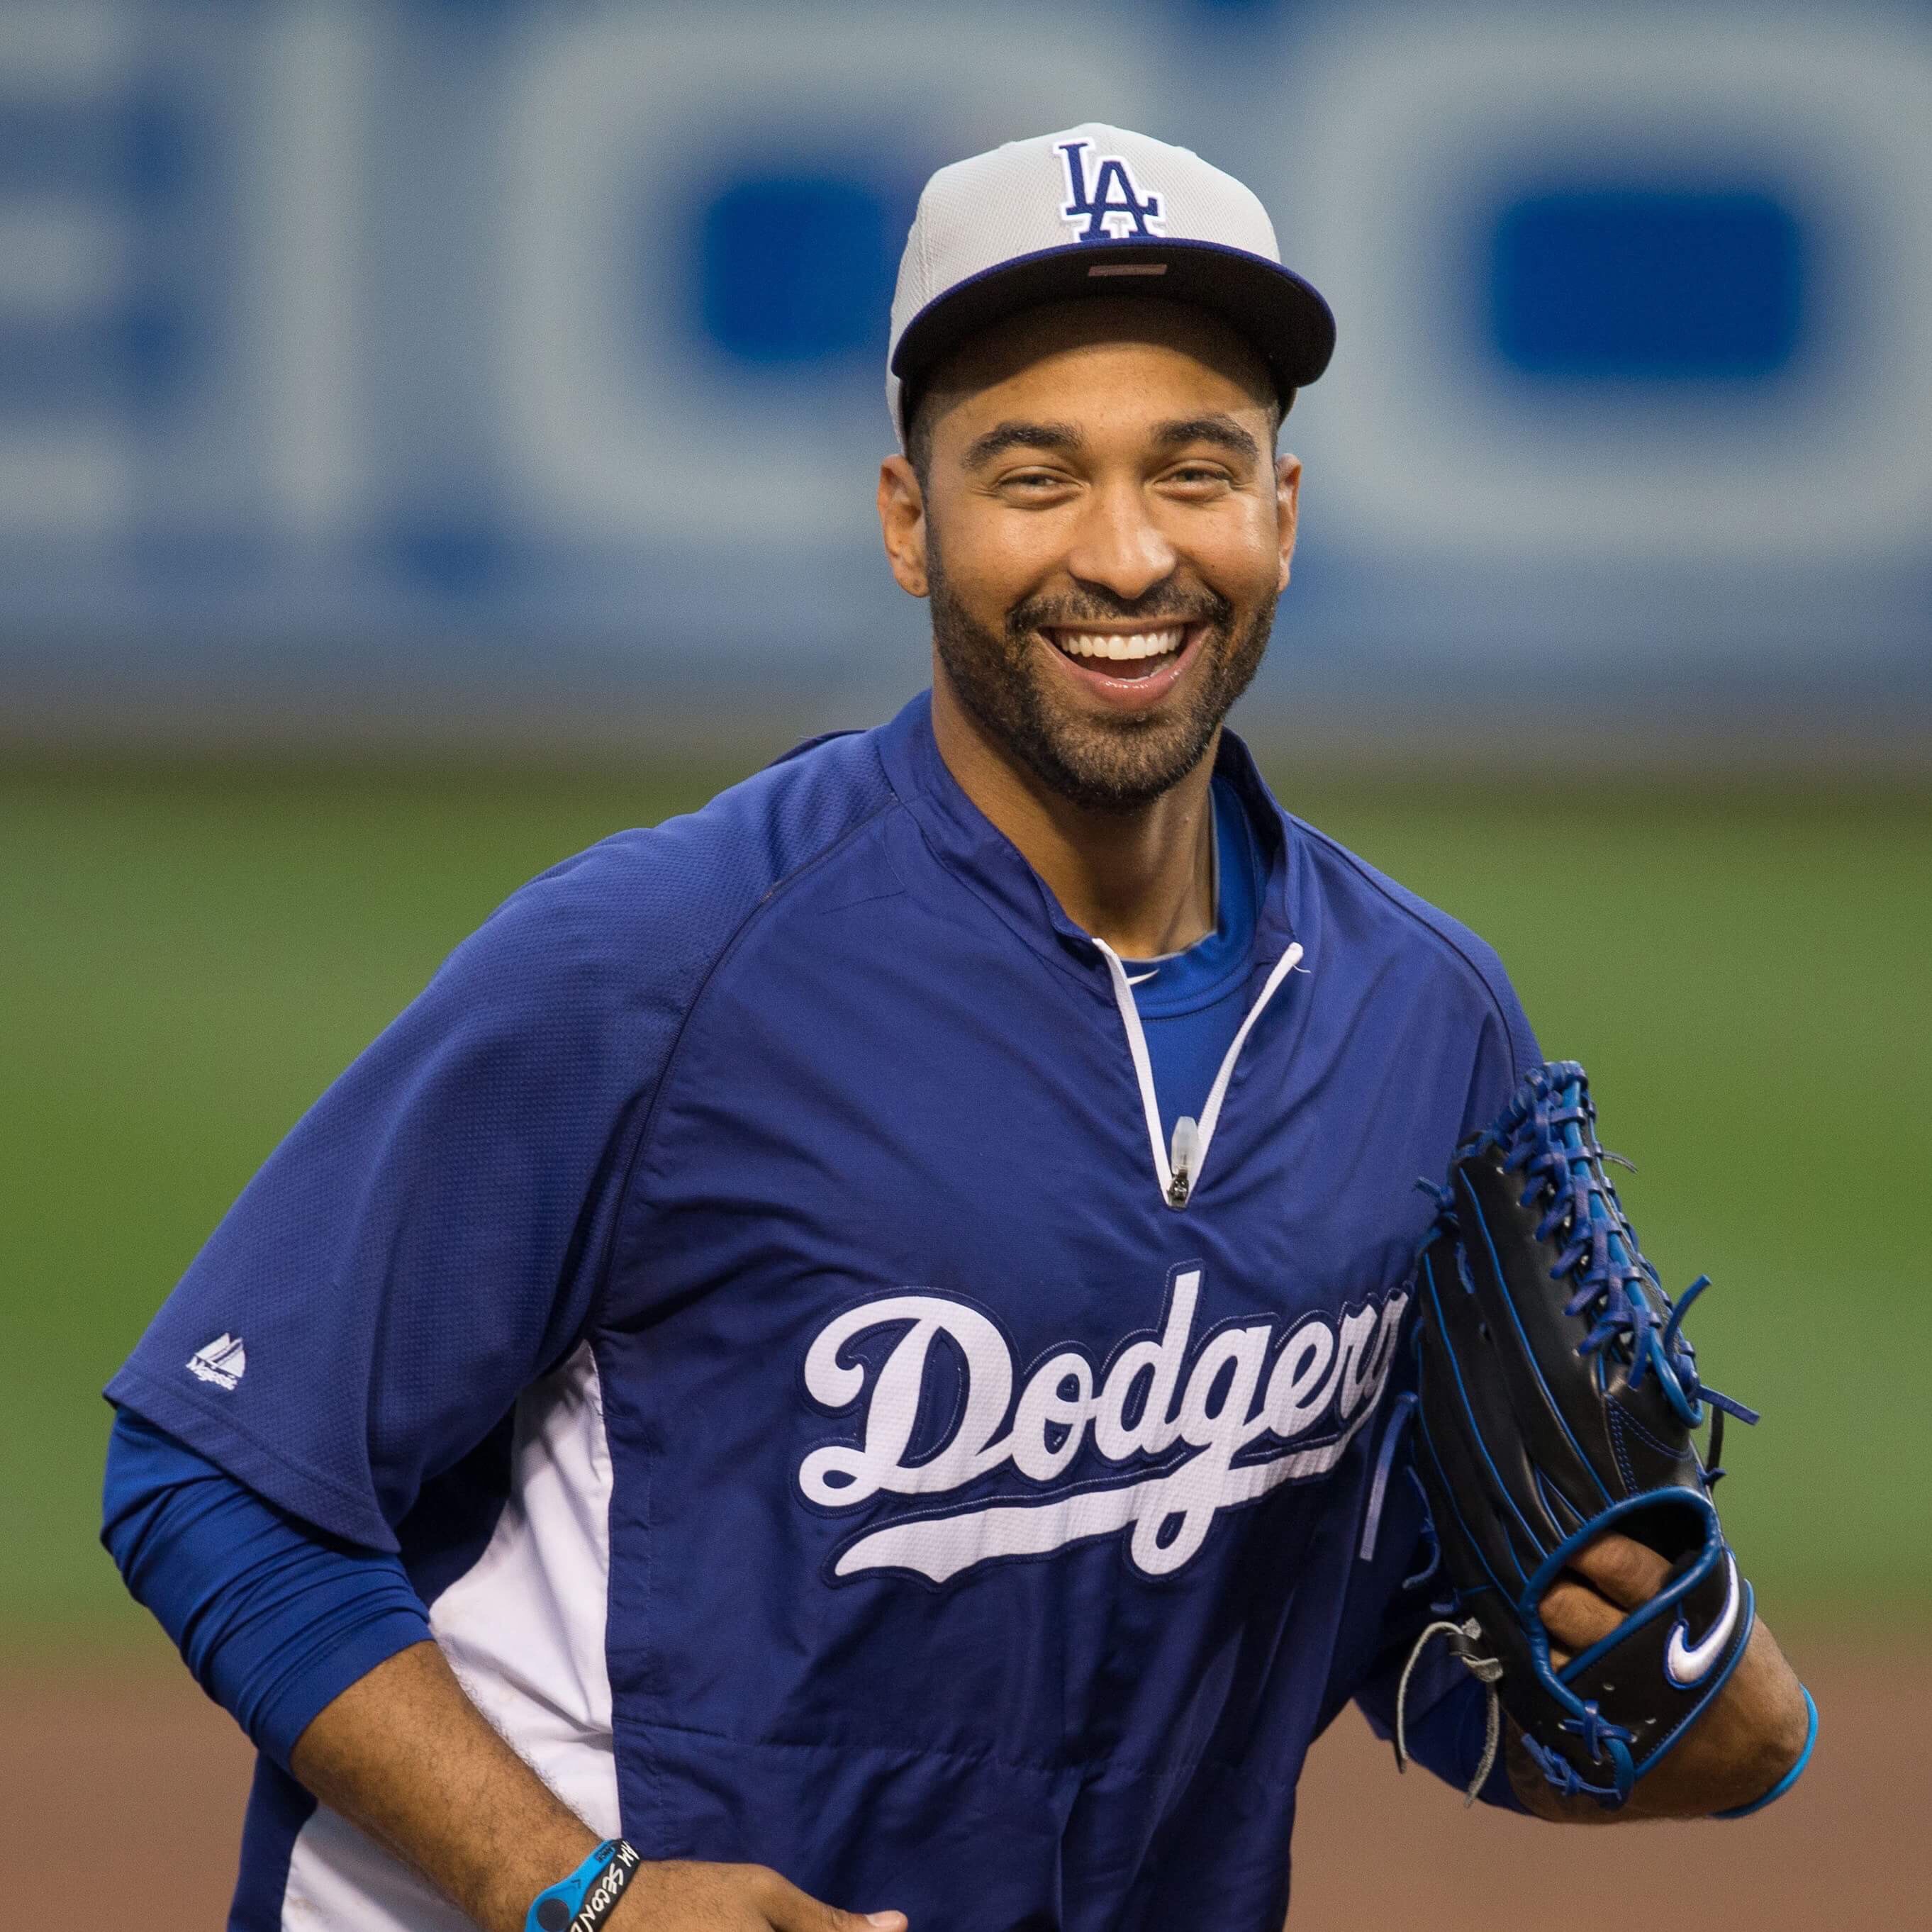 Kemp Goes 5-5: The Dodgers Destroyed The Pirates 17-1!